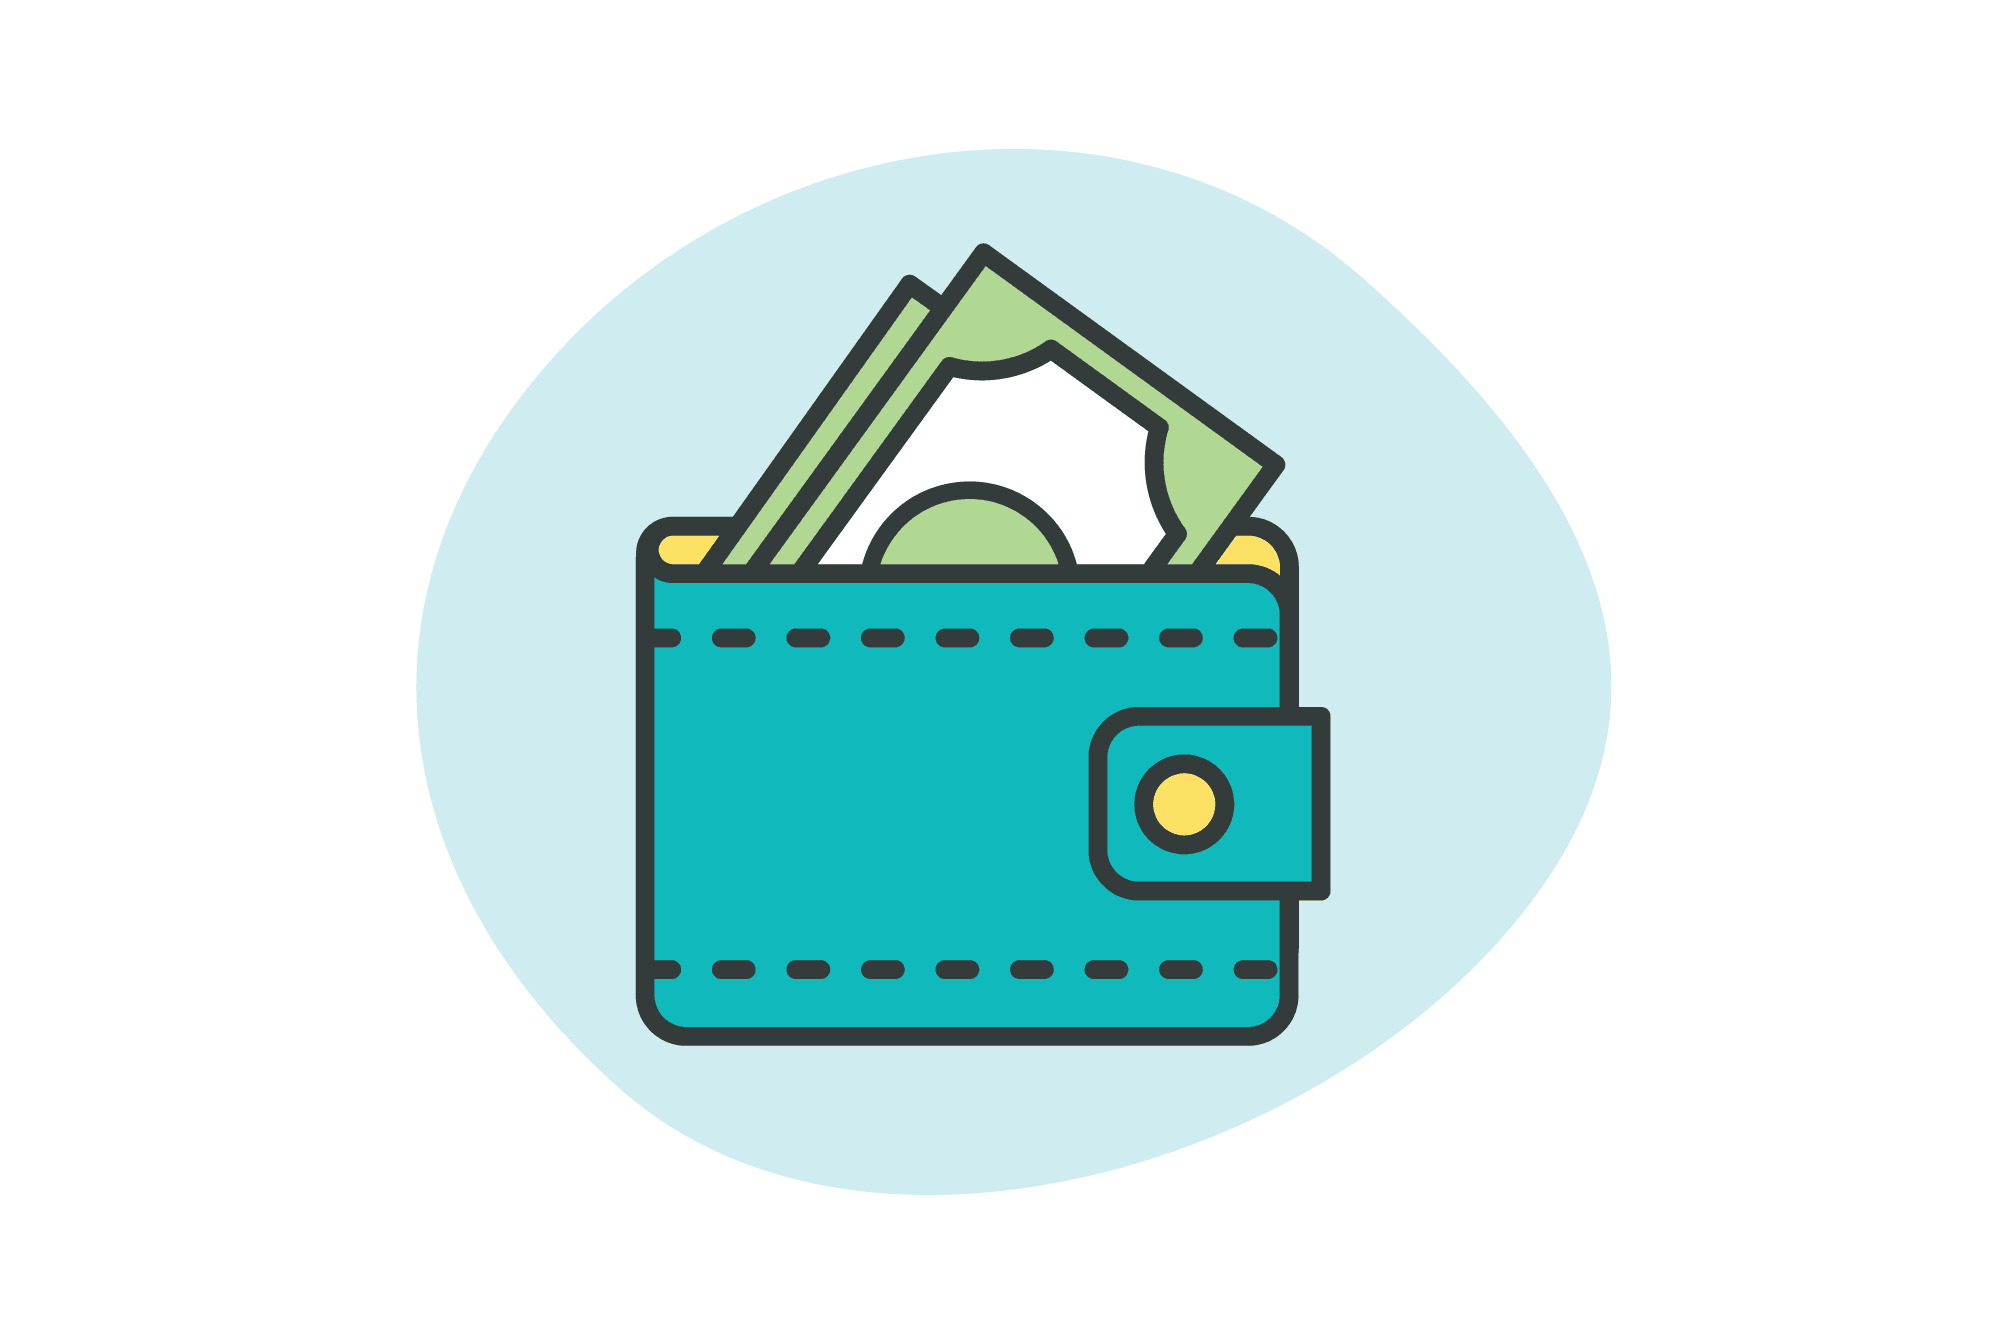 An illustration of a wallet with bills poking out